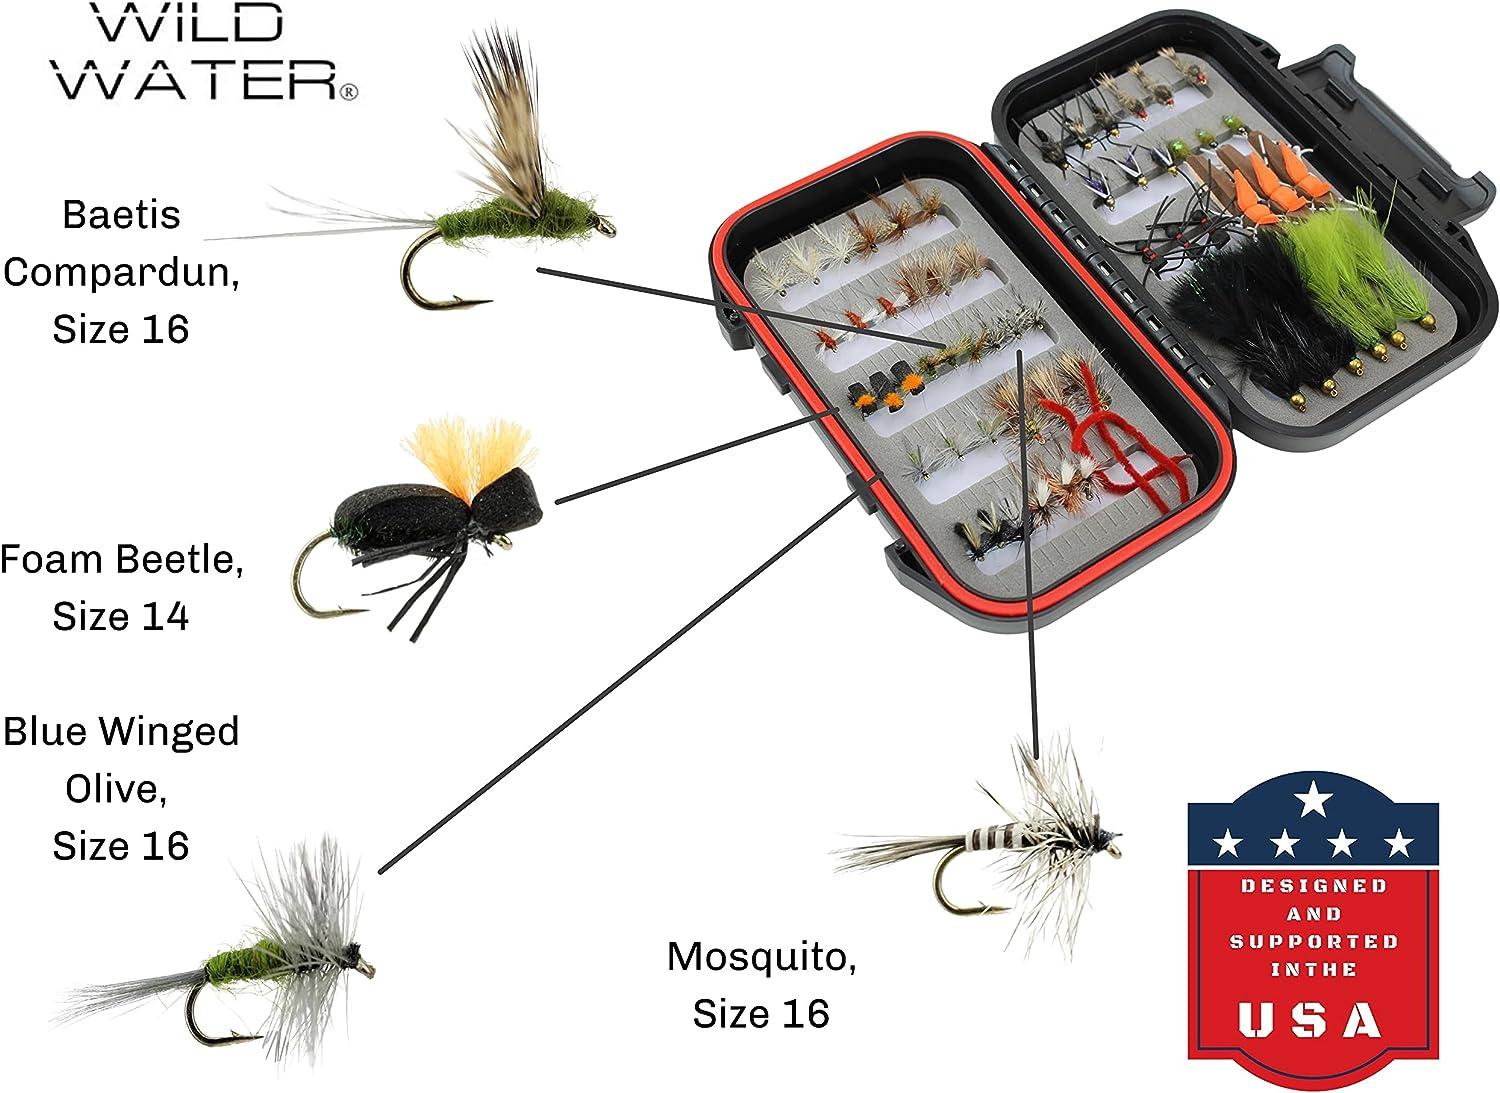 Wild Water Fly Fishing 60 Most Popular Flies in Mini-Mega Assortment with  Small Fly Box incl. Dry, Caddis, Nymph, Wooly Bugger for Trout, Panfish,  Crappie, Sunfish